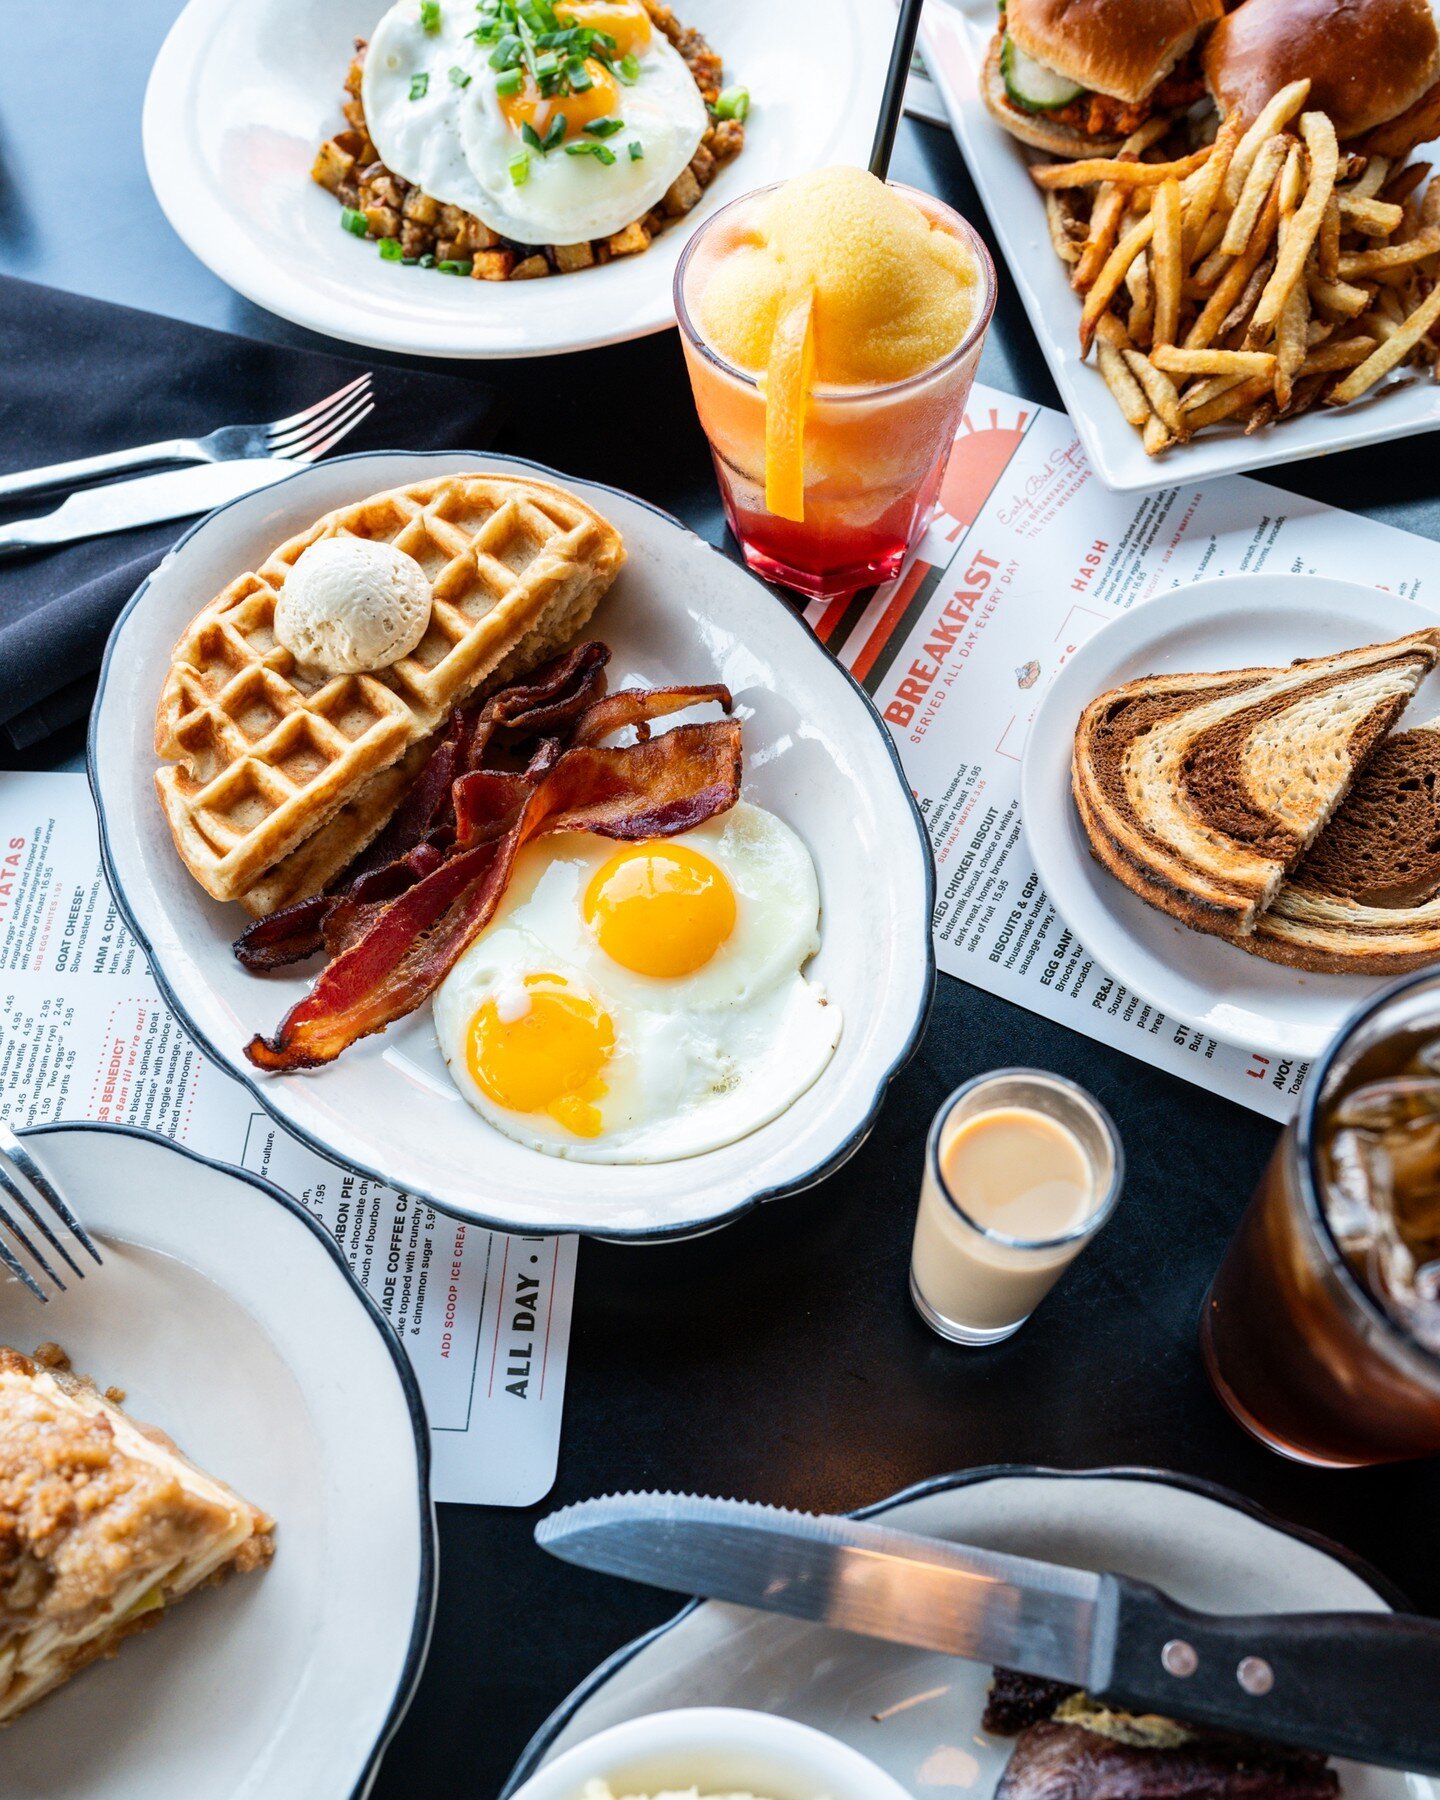 We've been serving Brunch seven days a week for fifteen years &mdash; why trust anyone else with your Waffles?! 🥂🧇

#24Diner #LamarBlvd #BelgianWaffles #YeastRisen #BreakfastAllDay #ATXBrunchAustin #AustinDiners #AustinFoodie